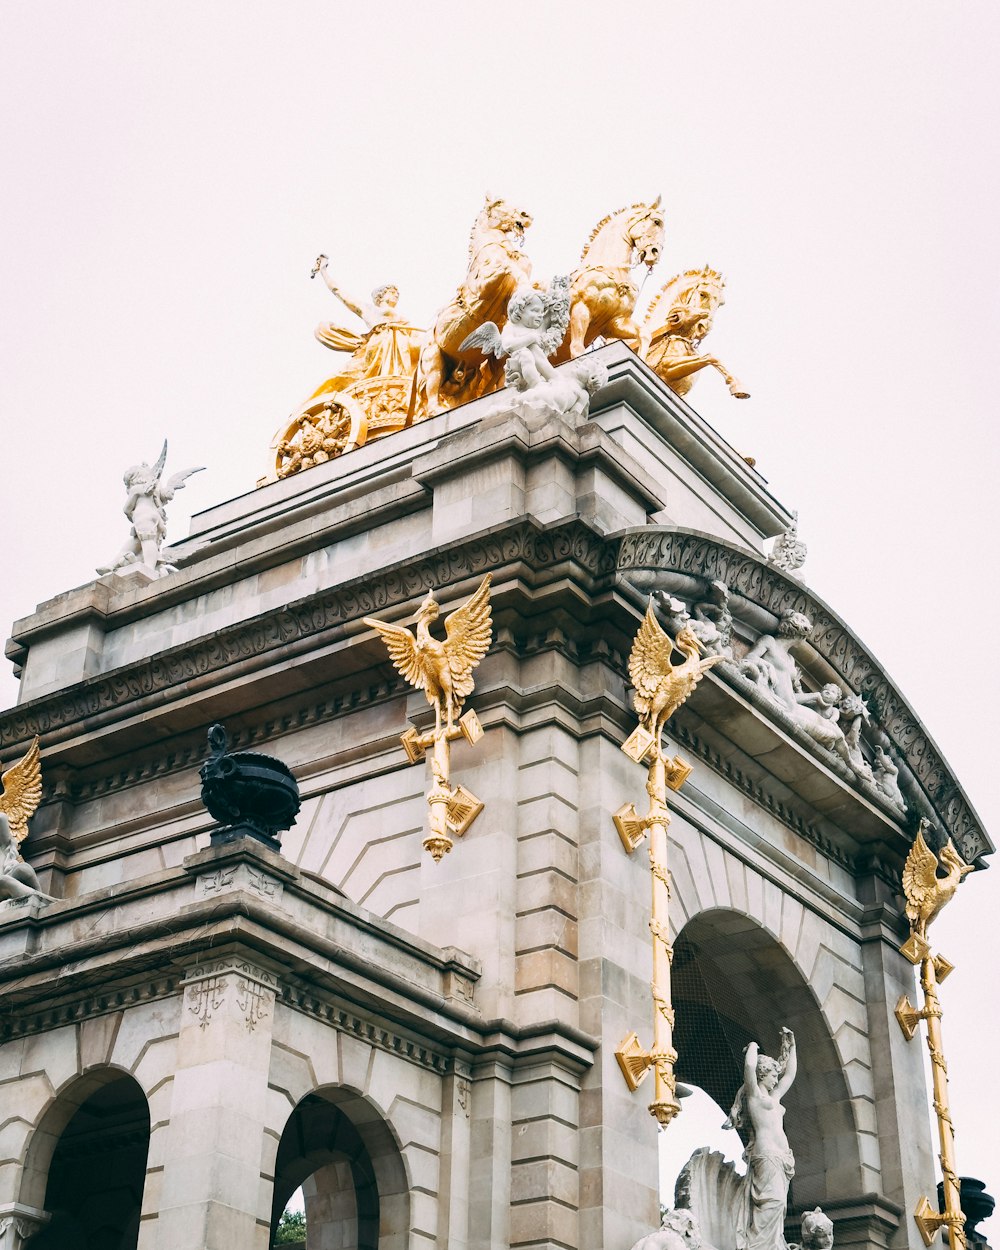 a clock tower with statues on top of it